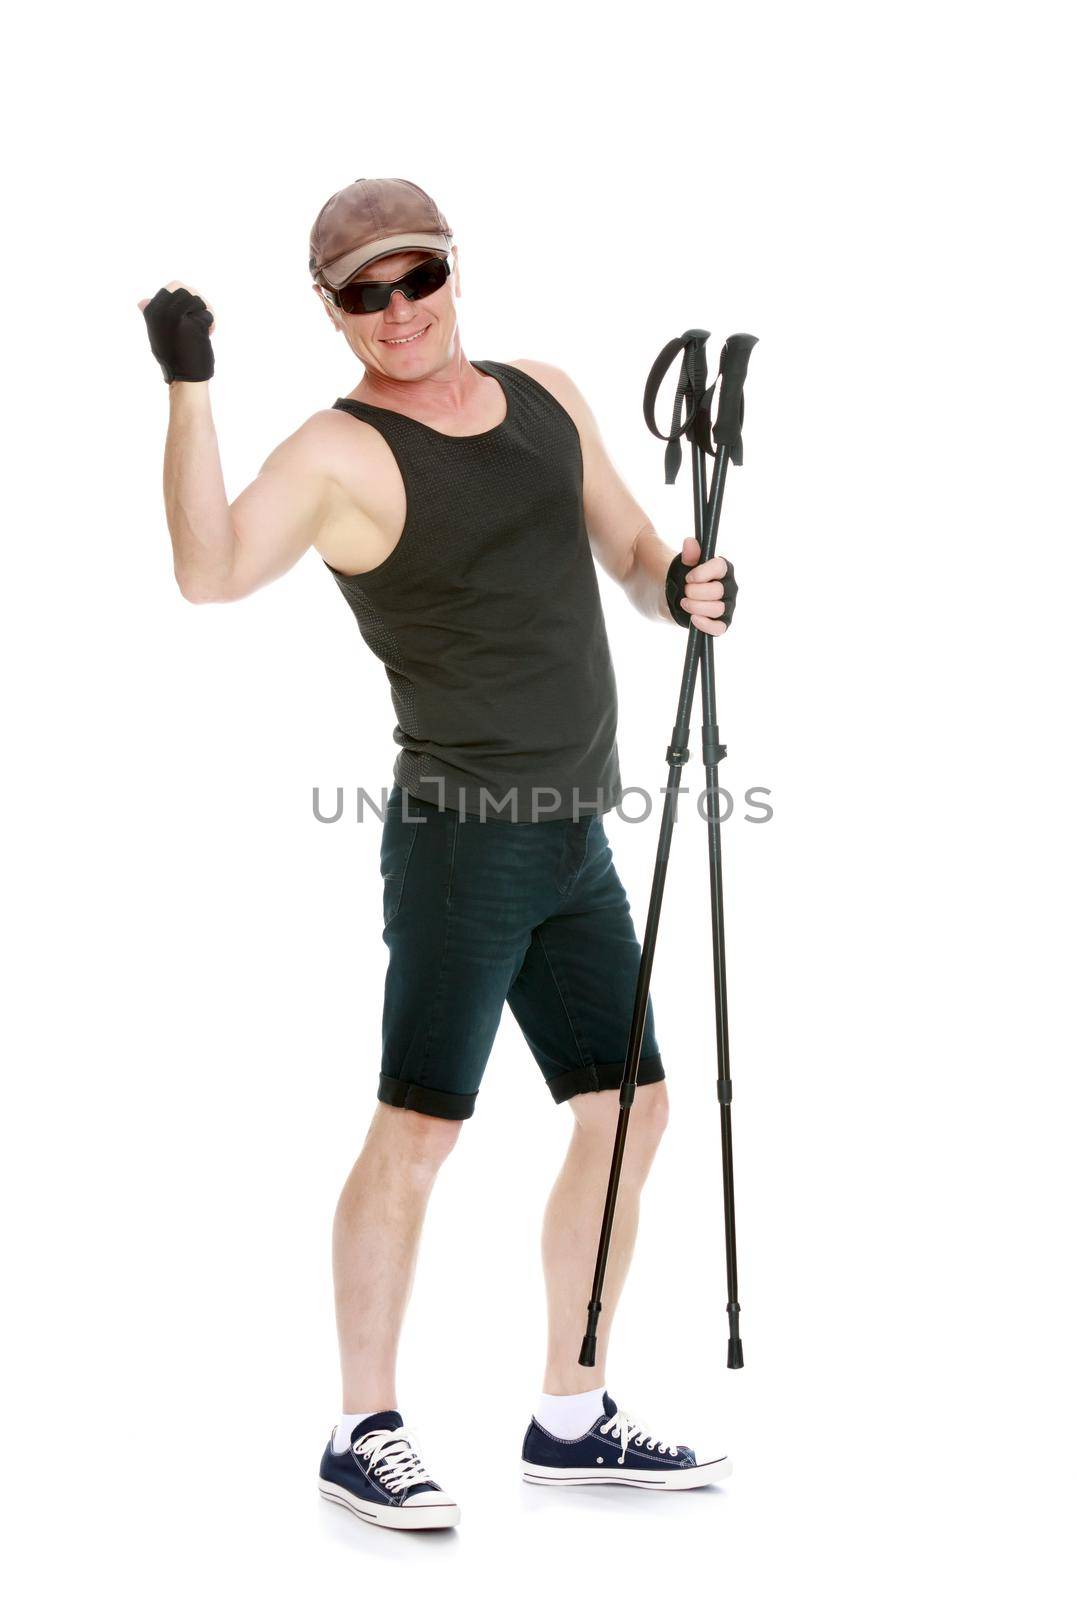 The concept of sports lifestyle and maintenance of health in adulthood. Fifty-year-old man, engaged in Nordic walking with special poles. Isolated on white background